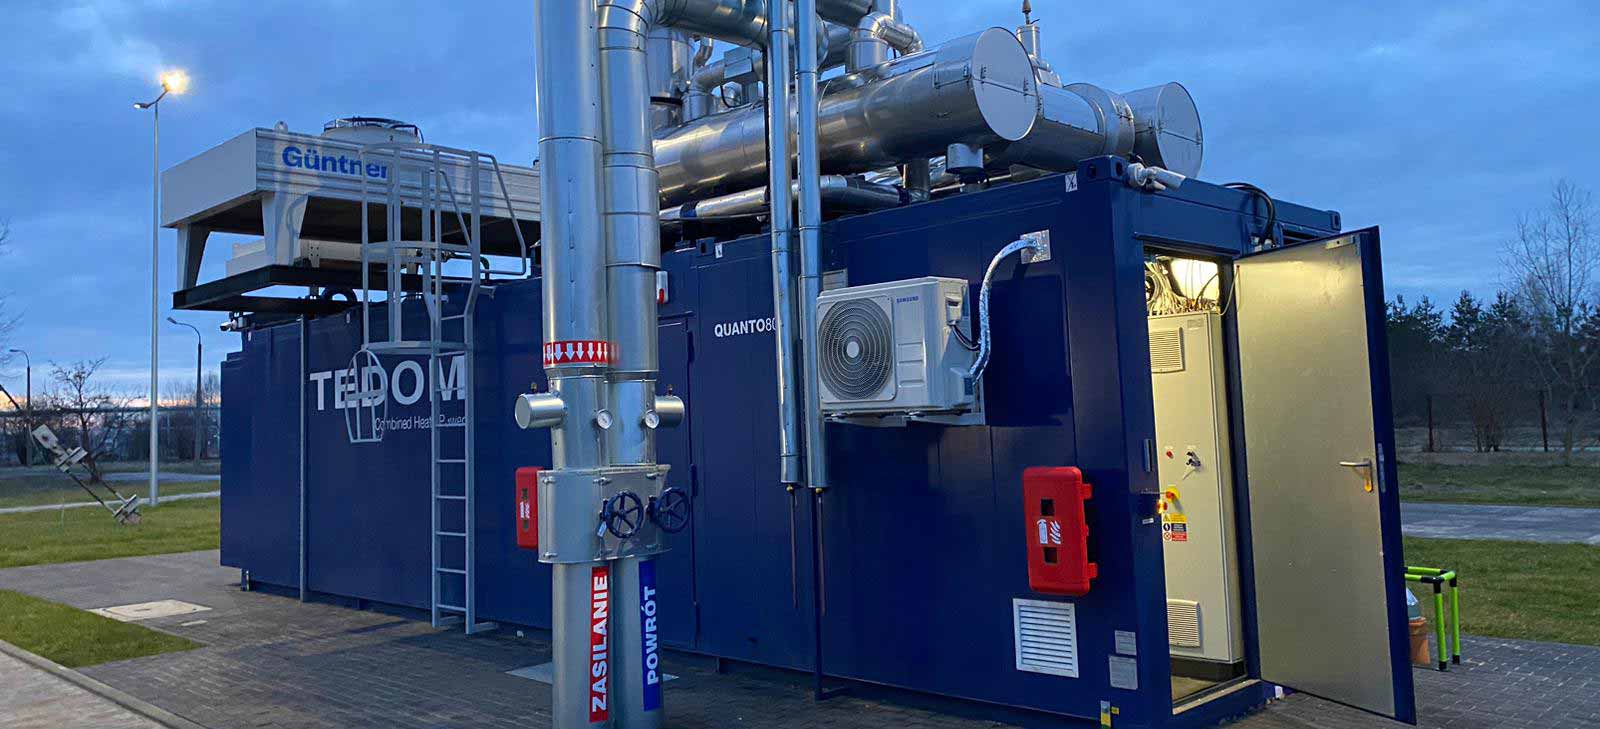 Modernization of a municipal boiler house in Poland: MWM TCG 3016 gas engine reduces carbon emissions by more than 6,000 t/year